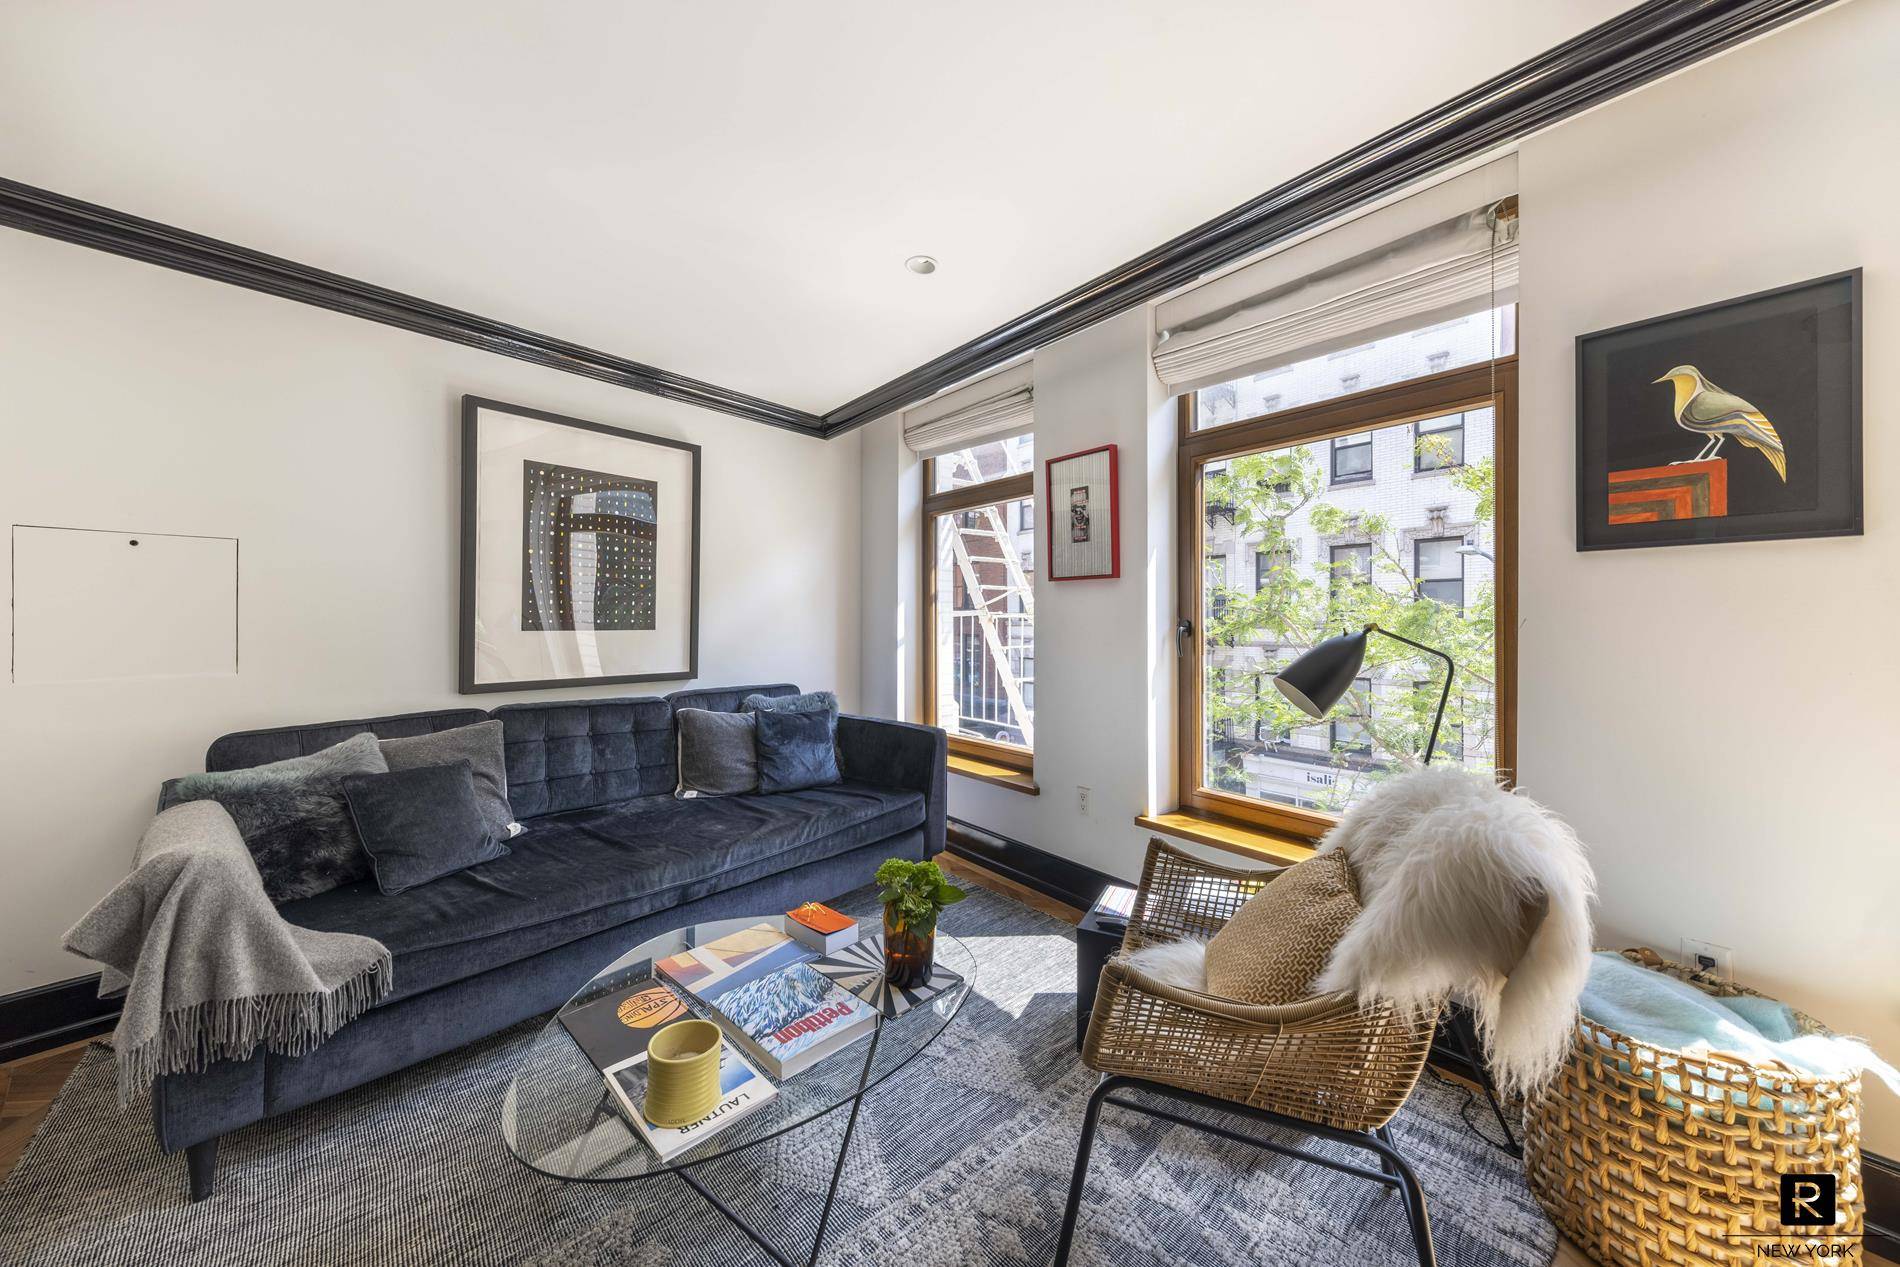 NEW DEVELOPMENT HIGH END CONDO CLASSIC SOHO BOUTIQUE ELEVATOR BUILDING WITH SOHO SWEETEST PRIVATE GARDEN PIED A TERRE PERFECTION and INVESTOR DREAM WITH SUPER LOW MONTHLYSouth facing one of New ...